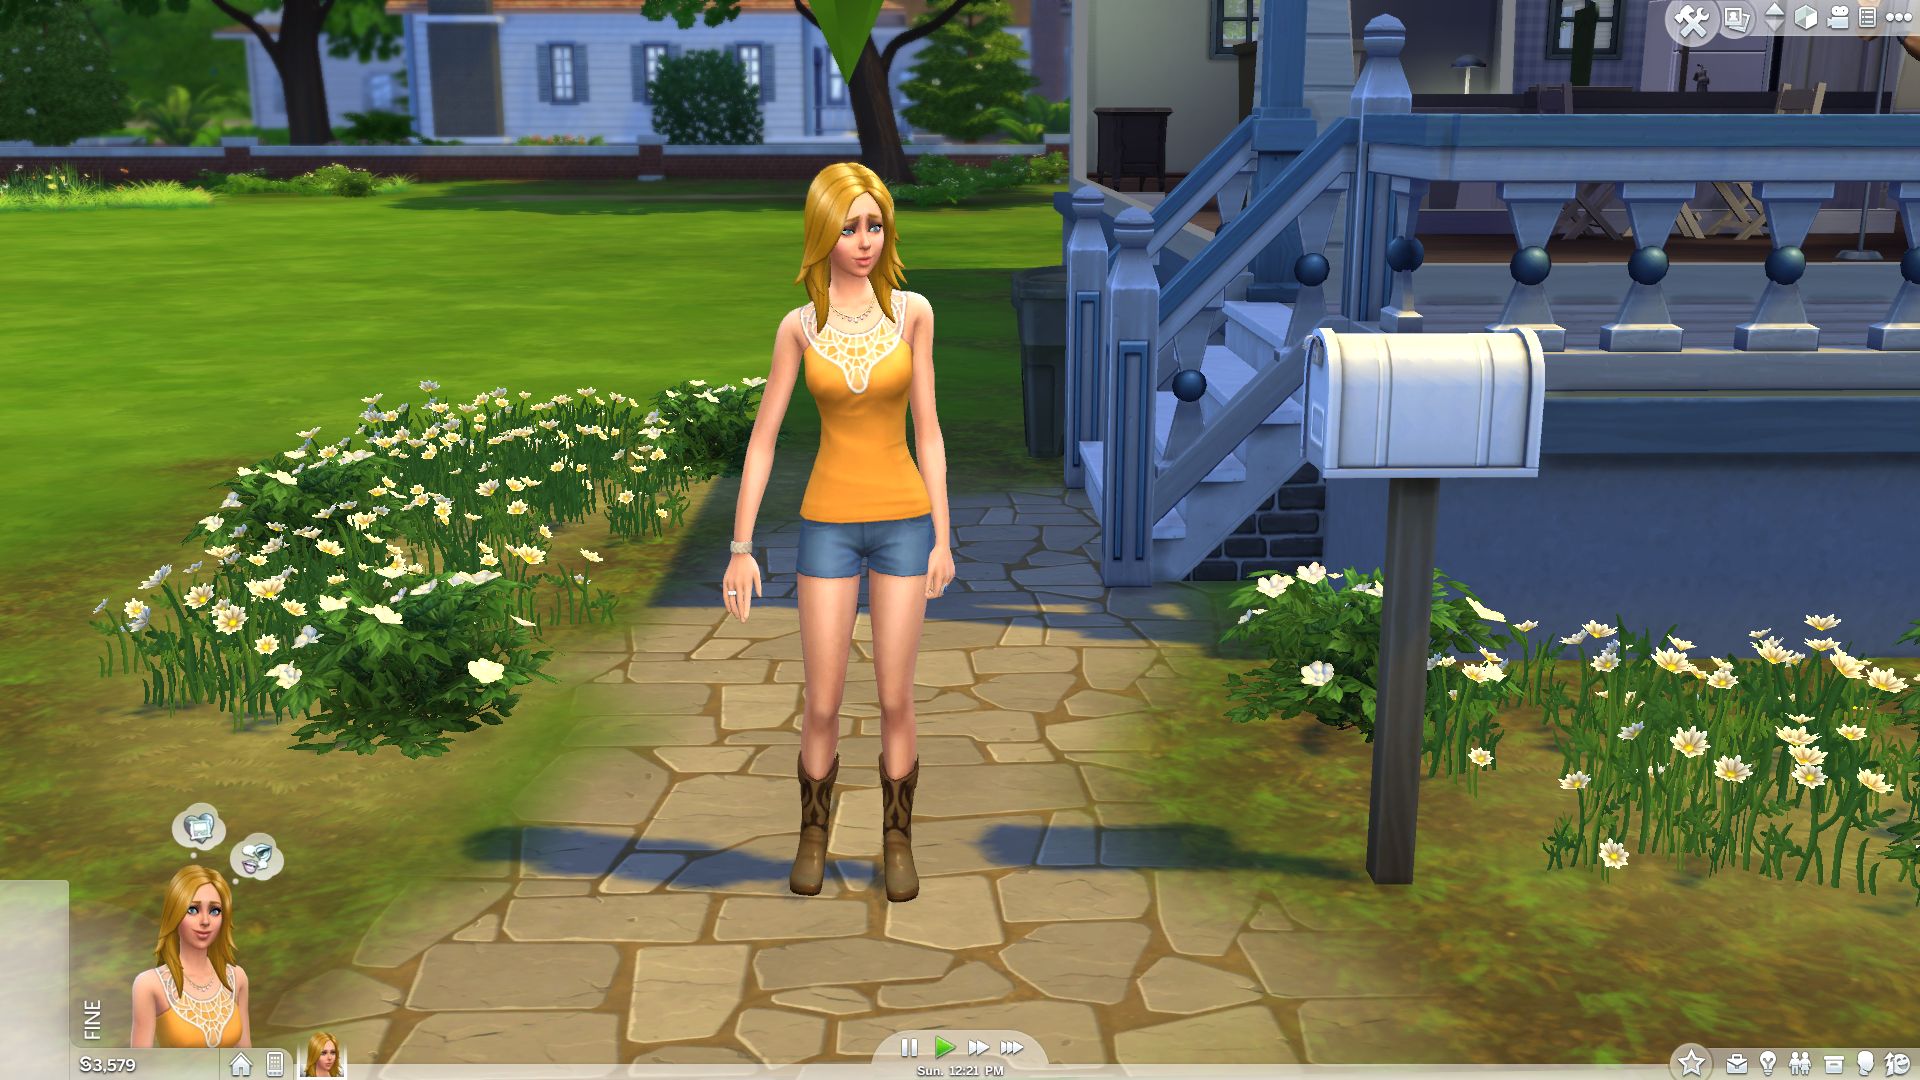 Sims 4 Benchmarked - NotebookCheck.net Reviews - 1920 x 1080 jpeg 319kB